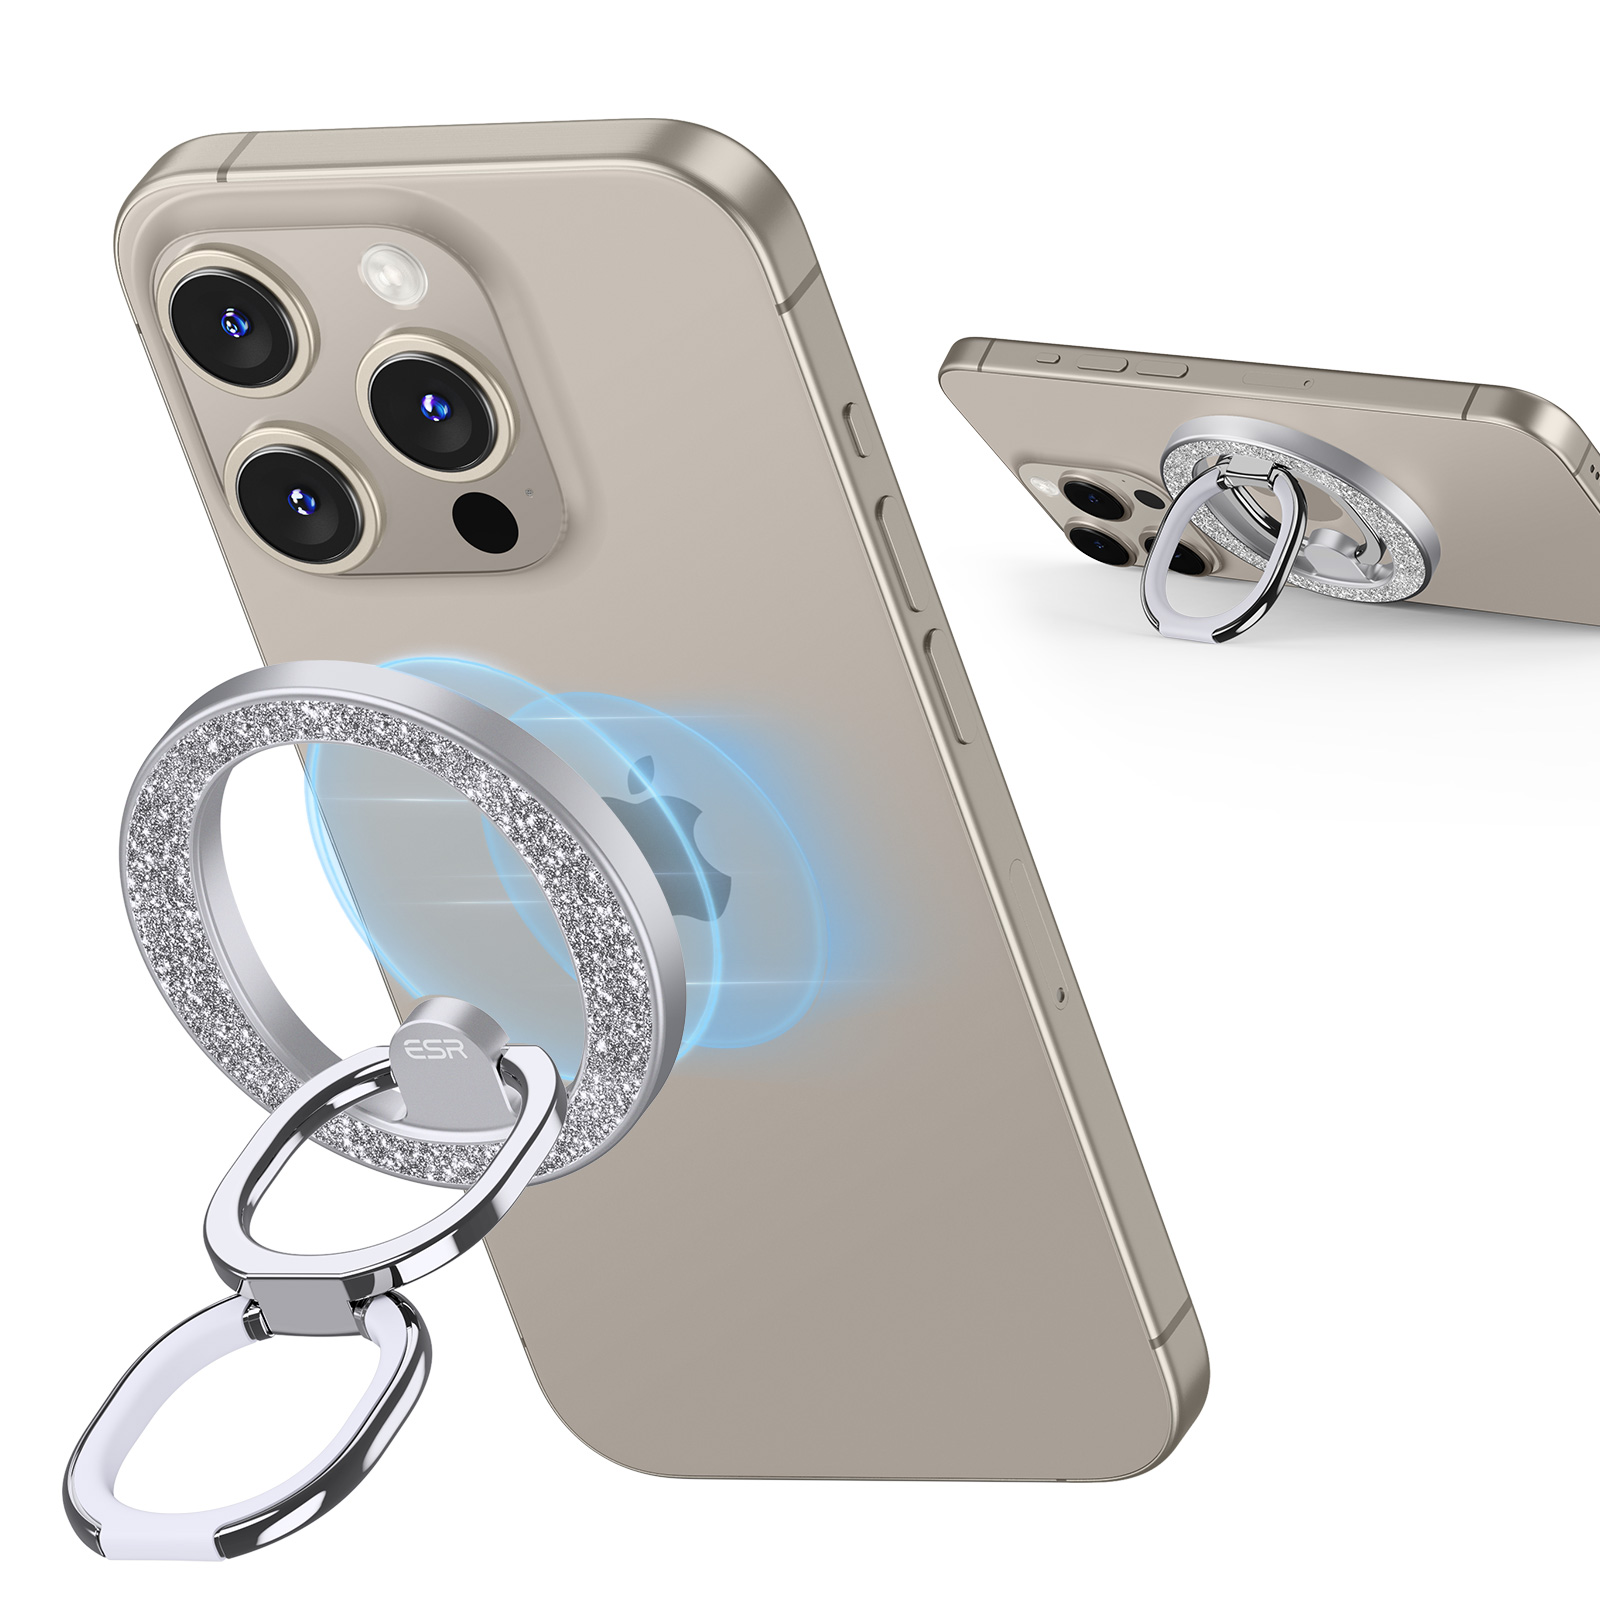 Amazon.com: Phone Ring Holder Stand, 2 in 1 Universal Air Vent Car Phone  Mount and Phone Finger Grip Ring with Strong Sticky Gel Pad Compatible with  iPhone X/8/7/6s/Plus, Galaxy S9/S8/S7 (Rose Gold) :